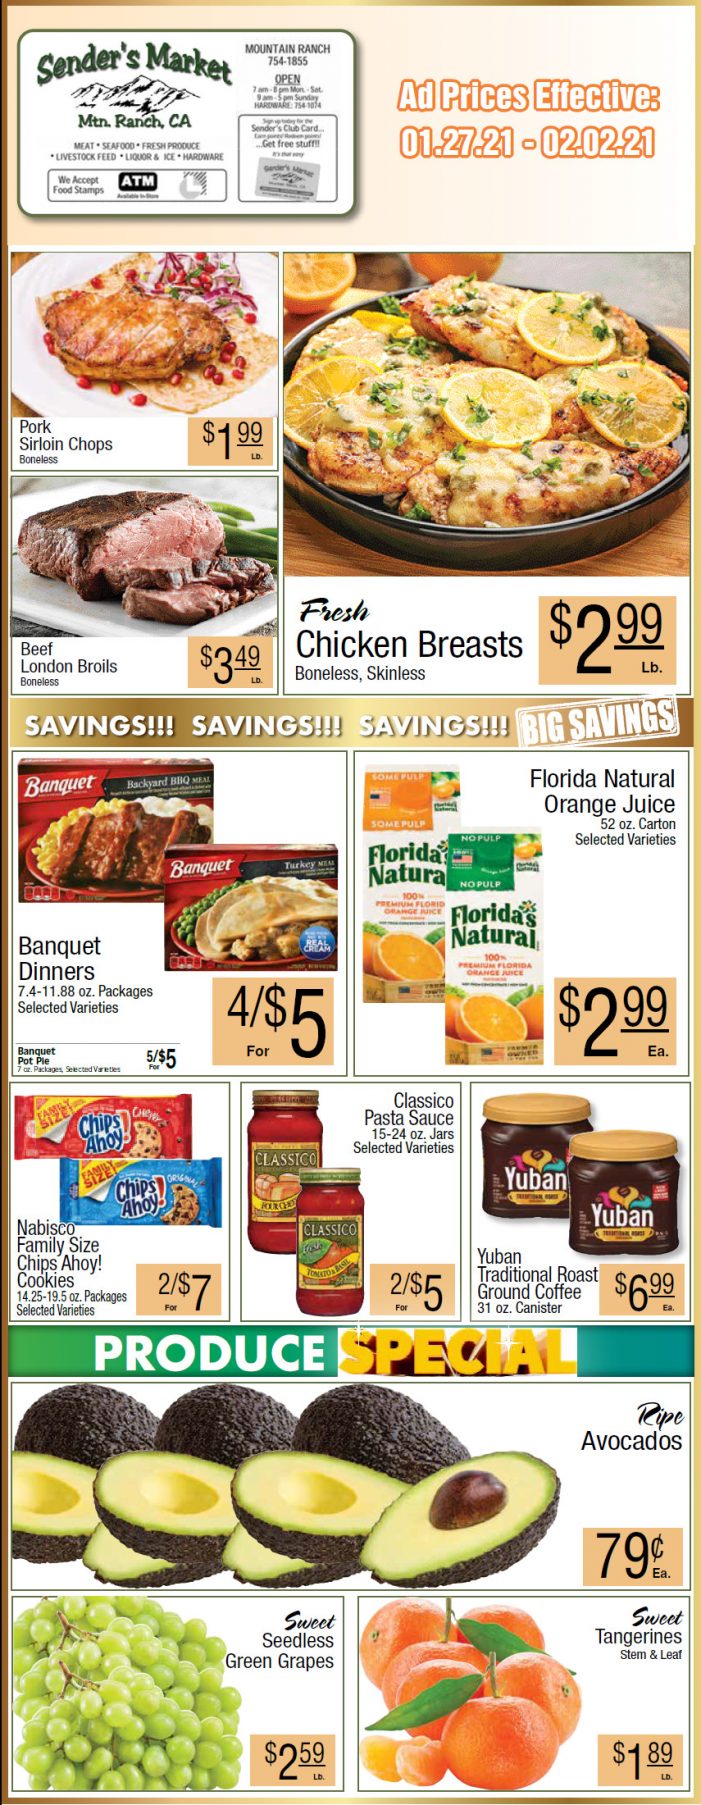 Sender’s Market’s Weekly Ad & Grocery Specials Through February 2nd!  Shop Local & Save!